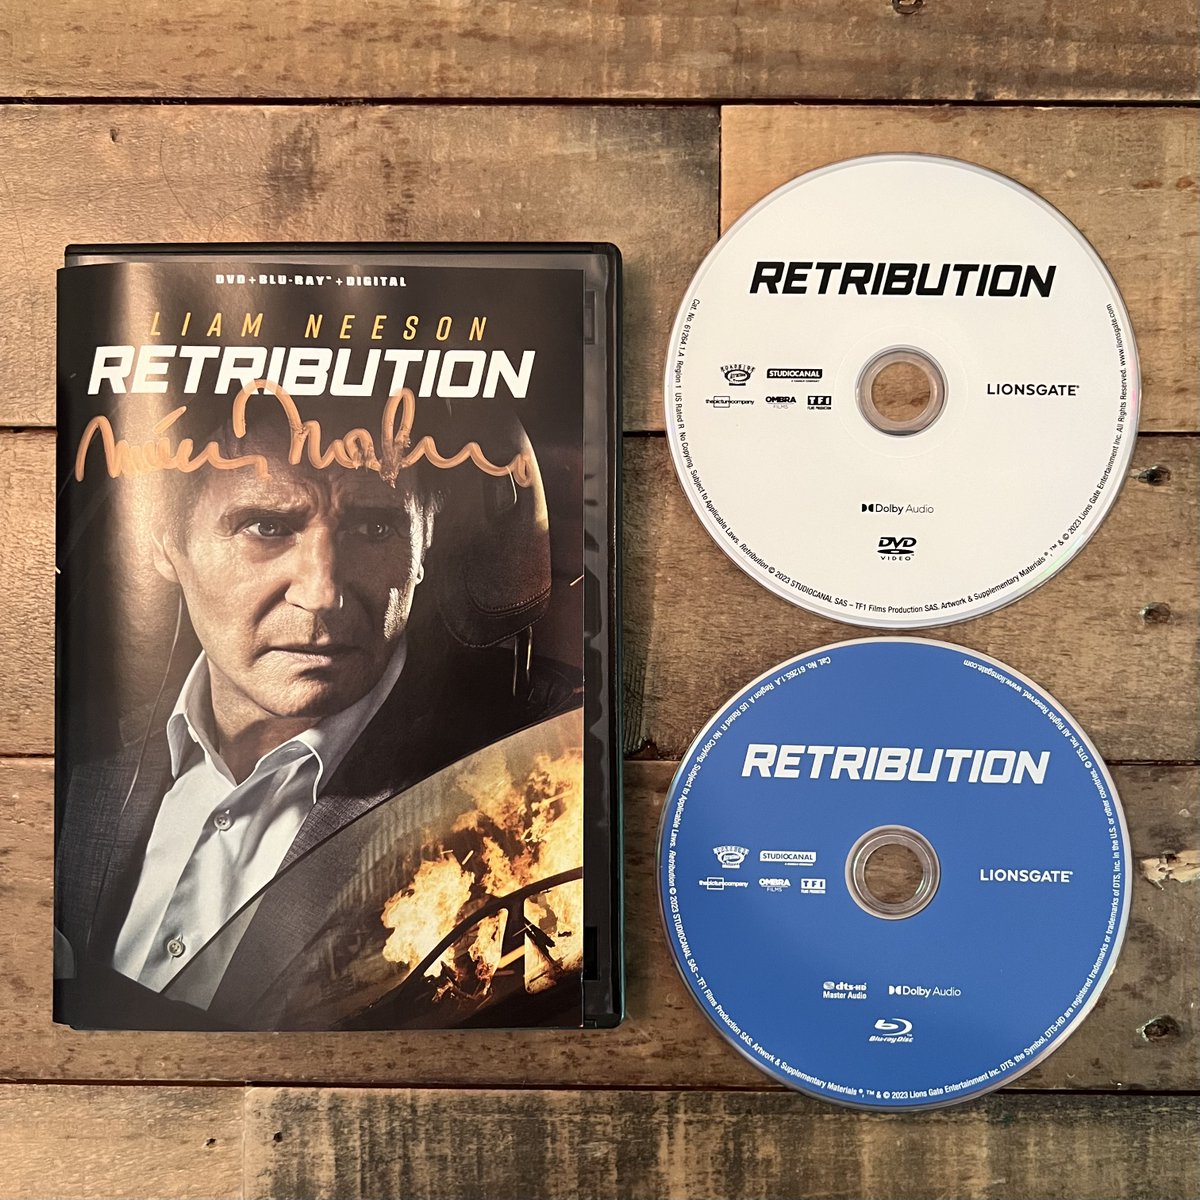 Repost (+ be following) by Monday, May 27 for a chance to win this signed copy of RETRIBUTION on Blu-ray + DVD from @Lionsgate! I co-star with my friend Liam Neeson. I'll pick one winner at random and announce next #ModineMonday. Good luck! lionsgate.com/movies/retribu…